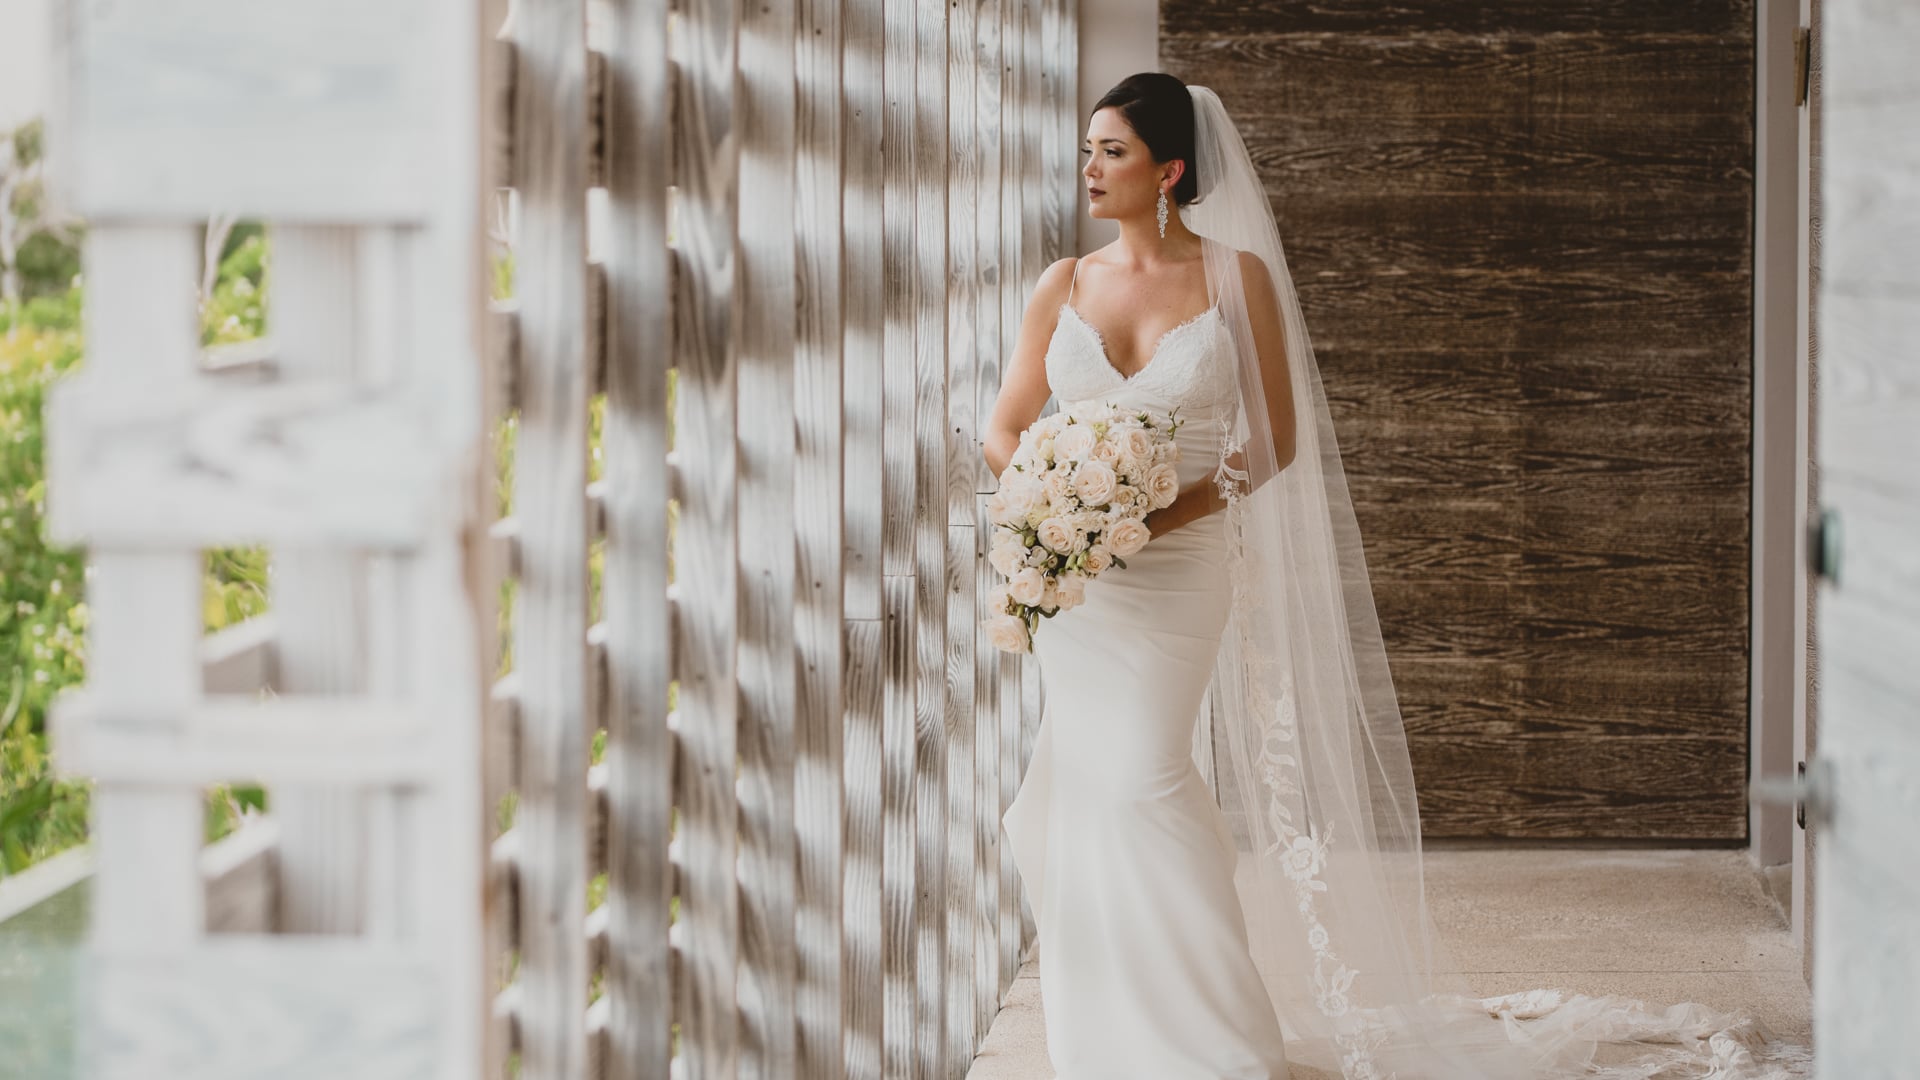 Colette & Vonnell | Andaz Mayakoba Casa Amate